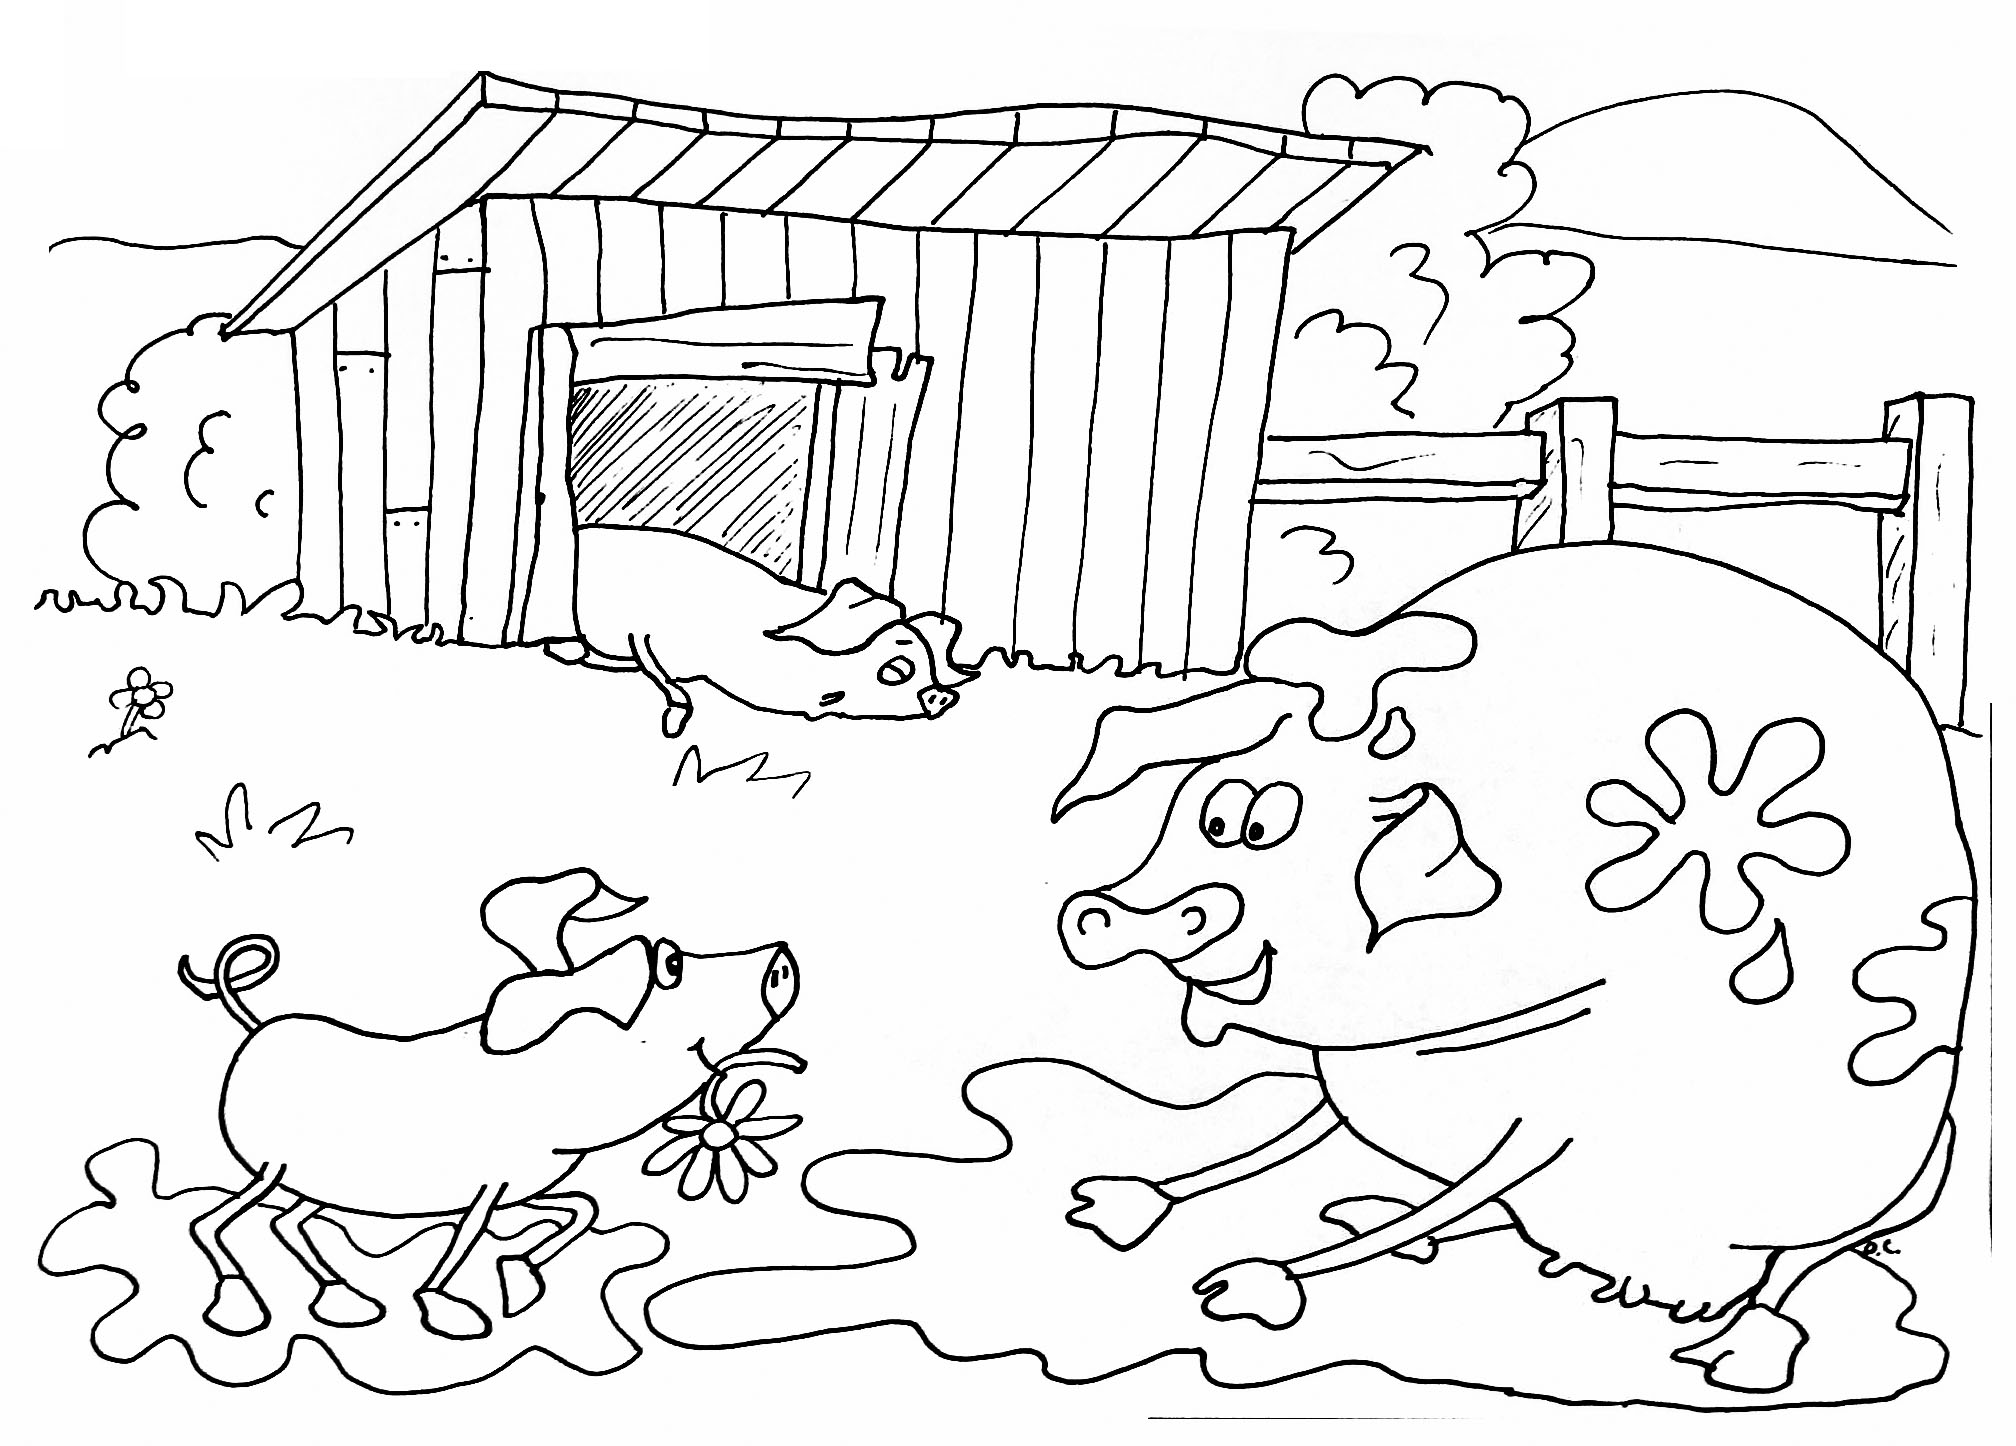 Farmhouse coloring pages for kids - Farm Kids Coloring Pages